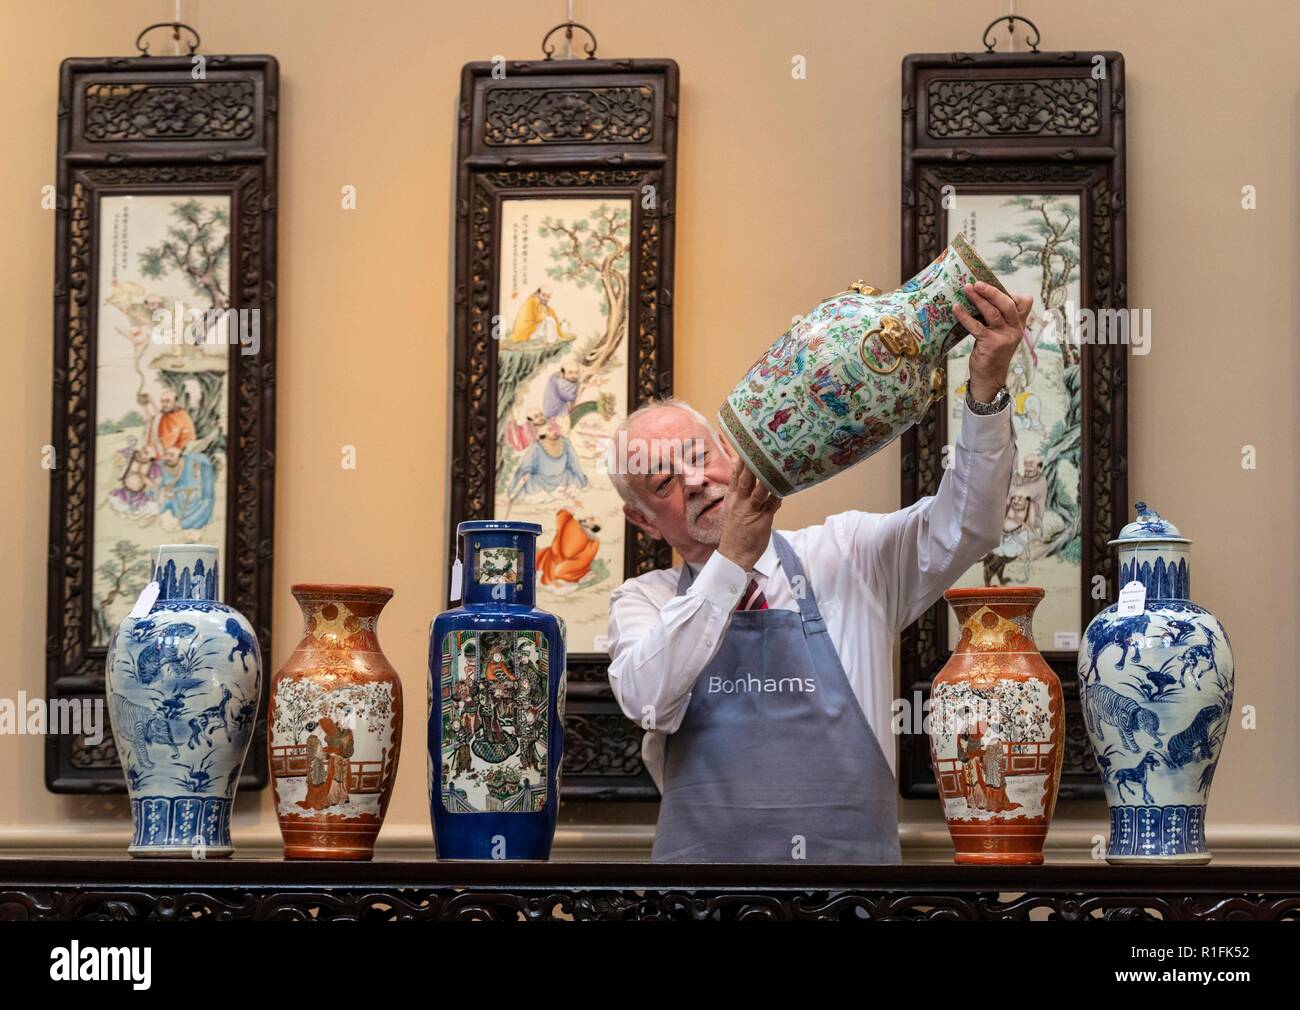 Edinburgh, UK. 12th Nov, 2018. The Bonhams Asian Art Sale takes place on Thursday 15 November at 22 Queen Street Edinburgh starting at 11 am. It features Japanese and Chinese Art including: bronzes, jades, snuff bottles, porcelain, textiles, lacquer, paintings and furniture. Pictured: Danny McIlwraith of Bonhams examining a Famille Rose Vase Credit: Rich Dyson/Alamy Live News Stock Photo